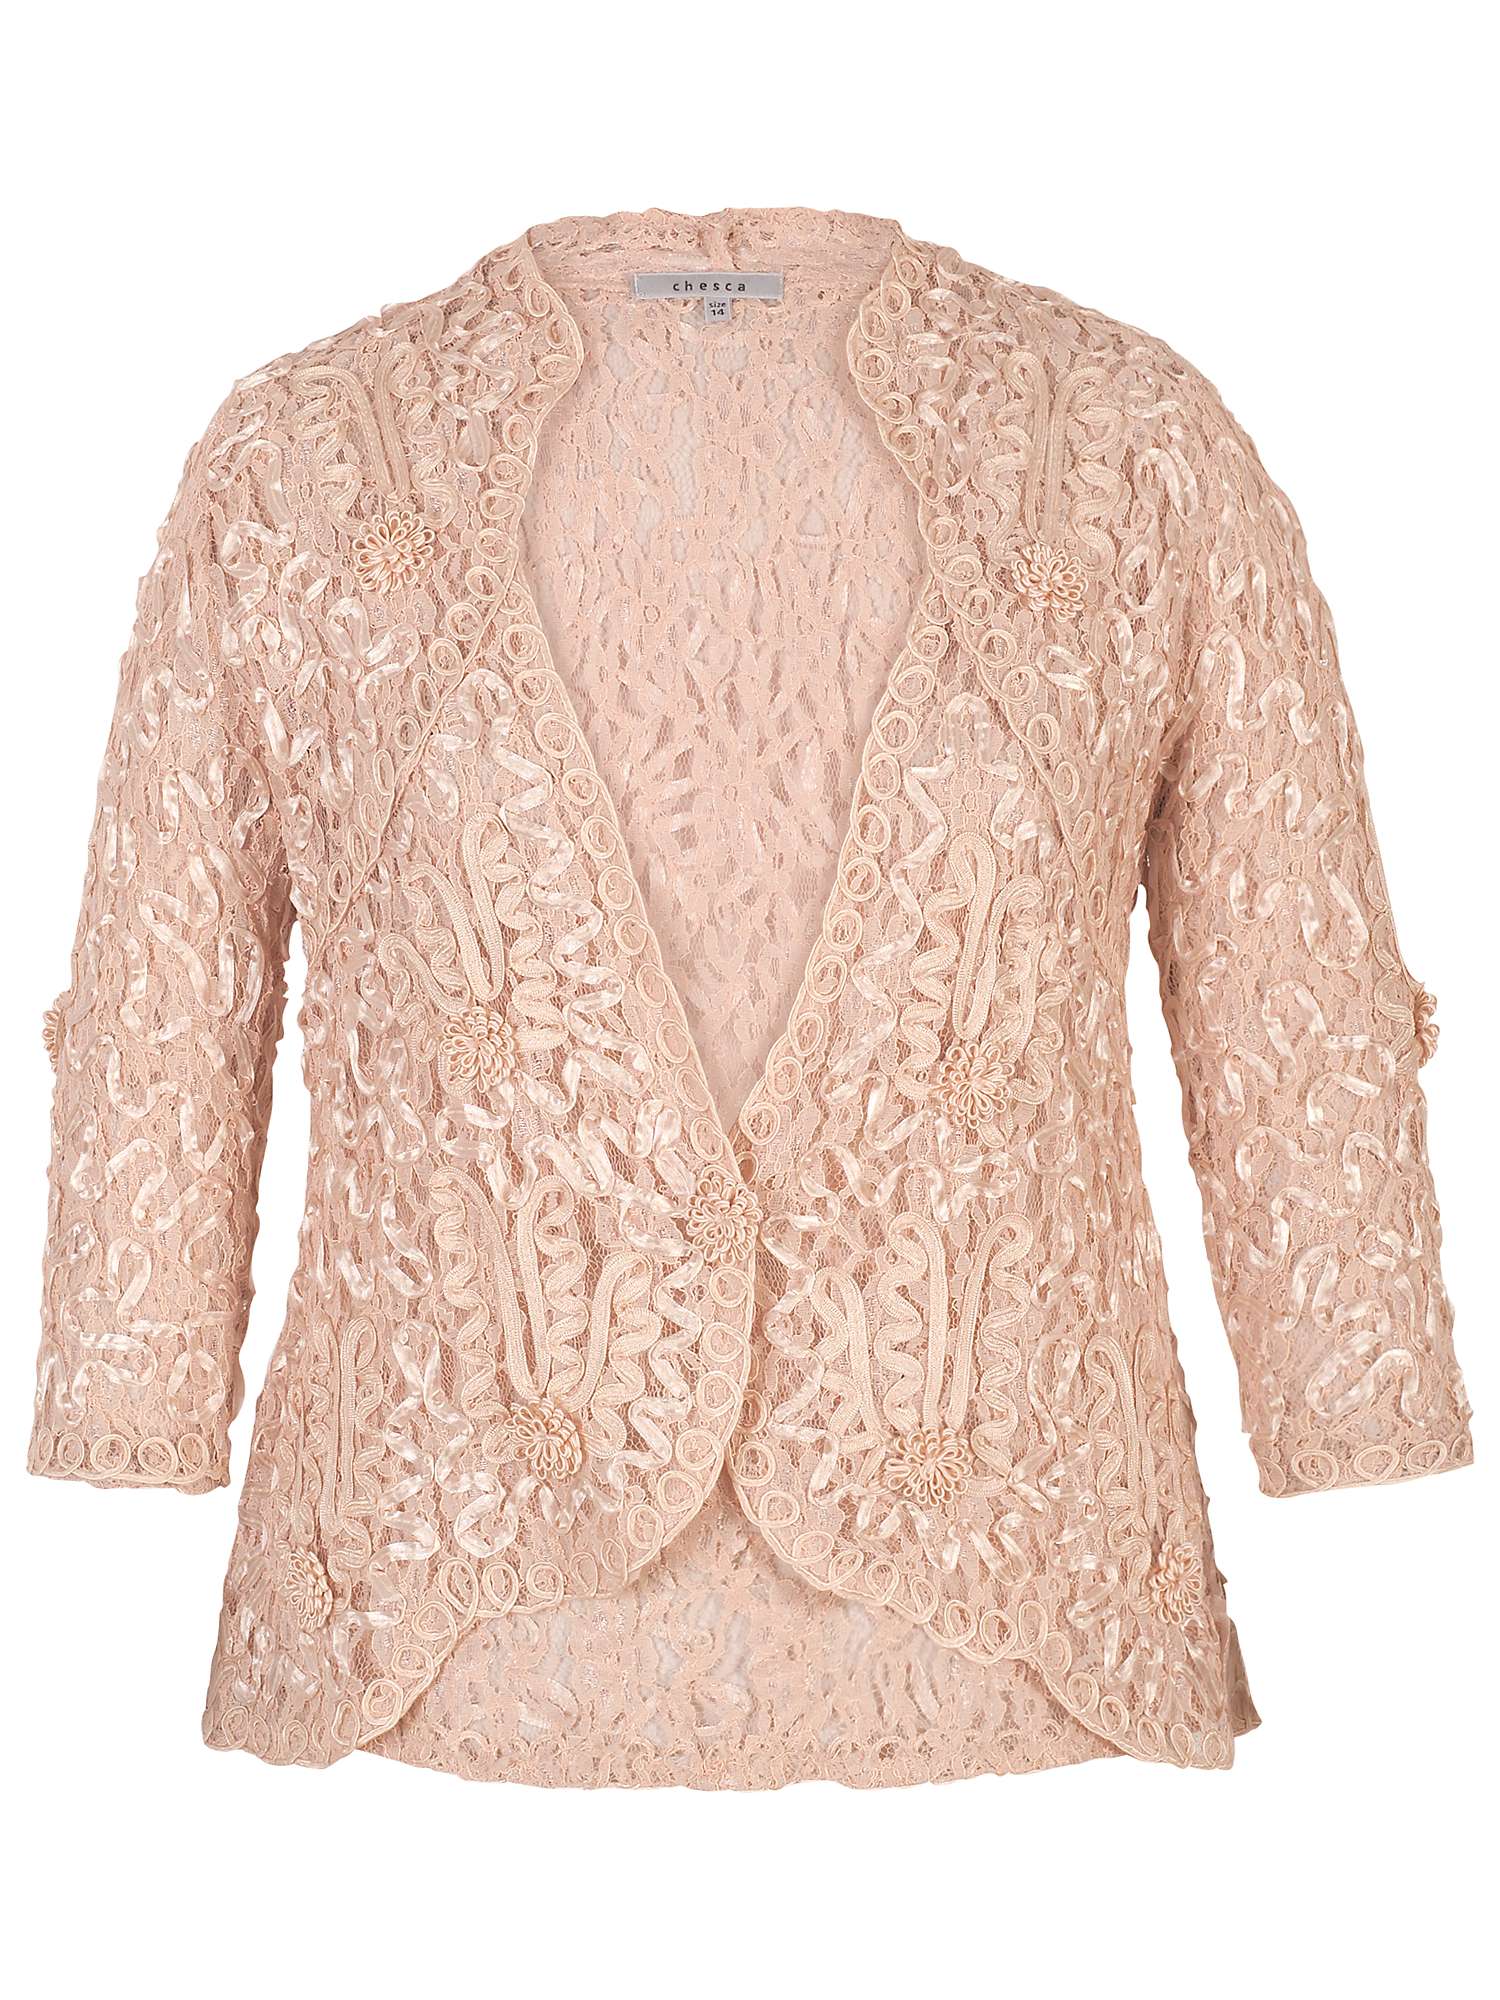 Buy Chesca Cornelli Trimmed Lace Jacket Online at johnlewis.com